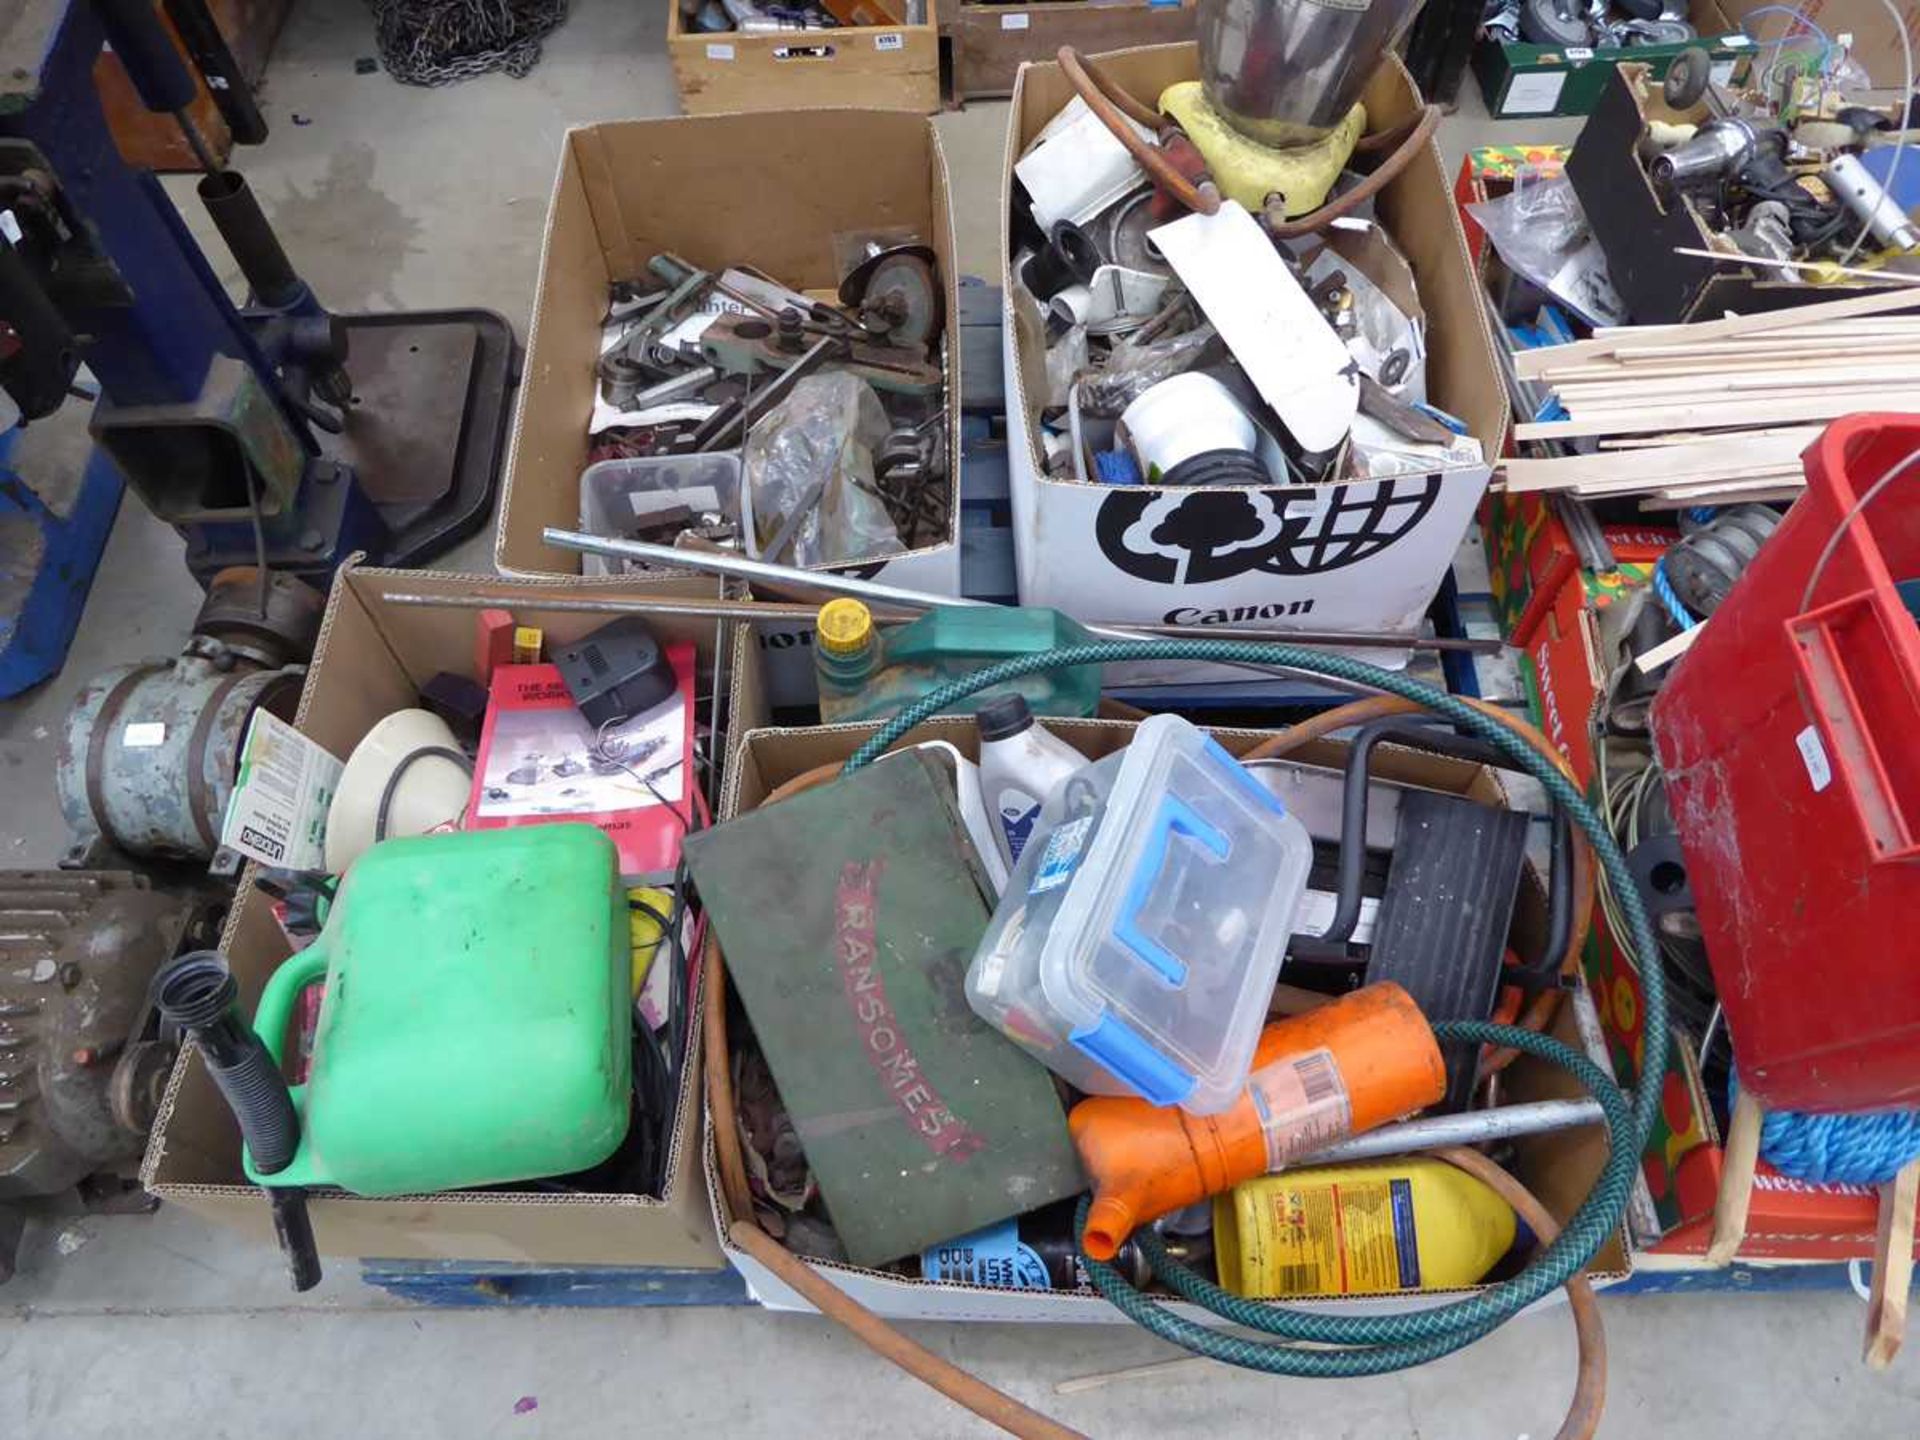 Pallet of assorted items including machine parts, oil, plumbing parts, heaters, etc